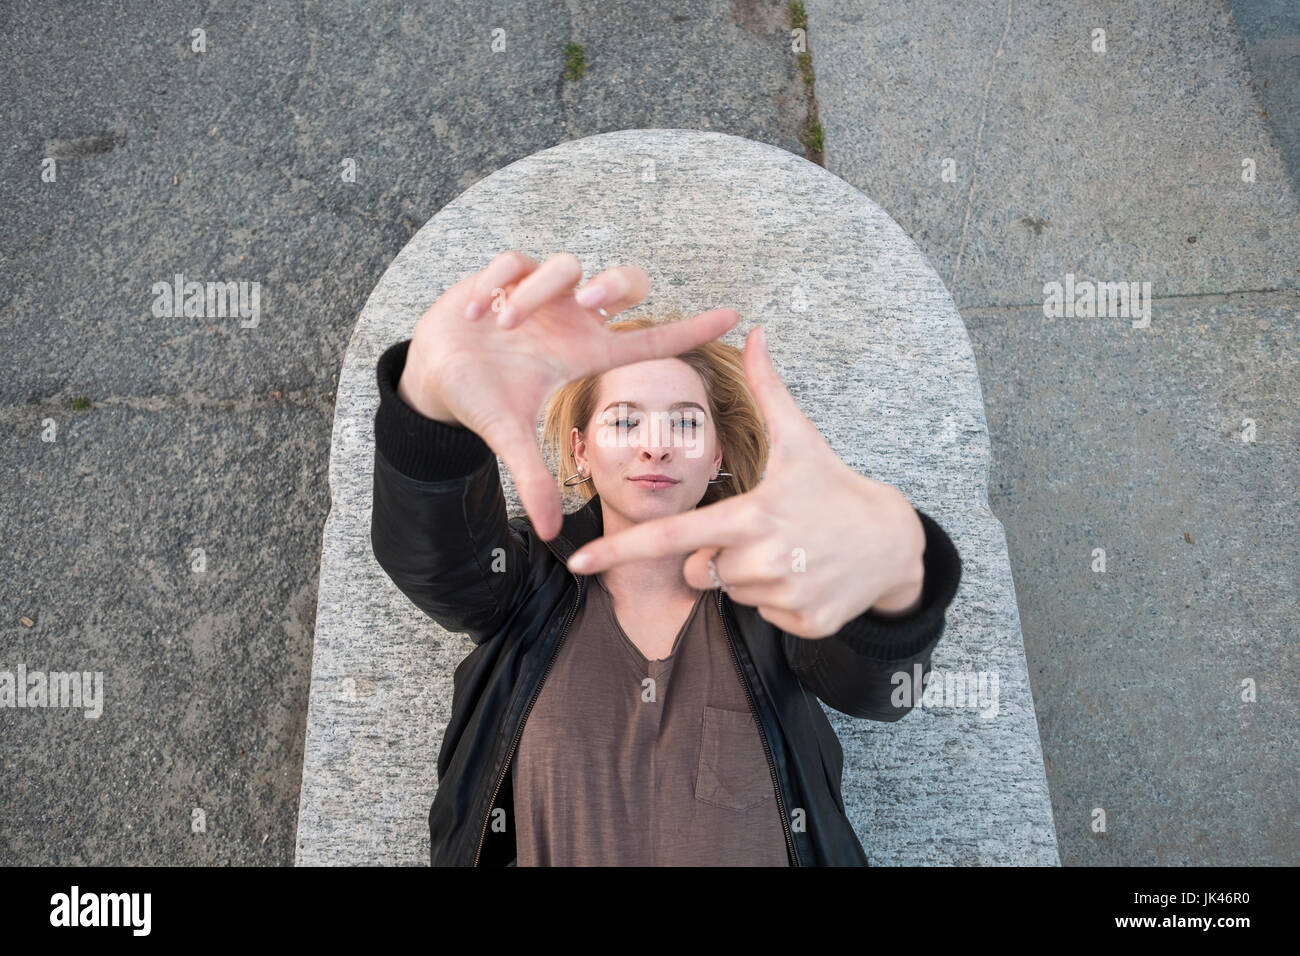 Caucasian woman laying on concrete gesturing square Stock Photo